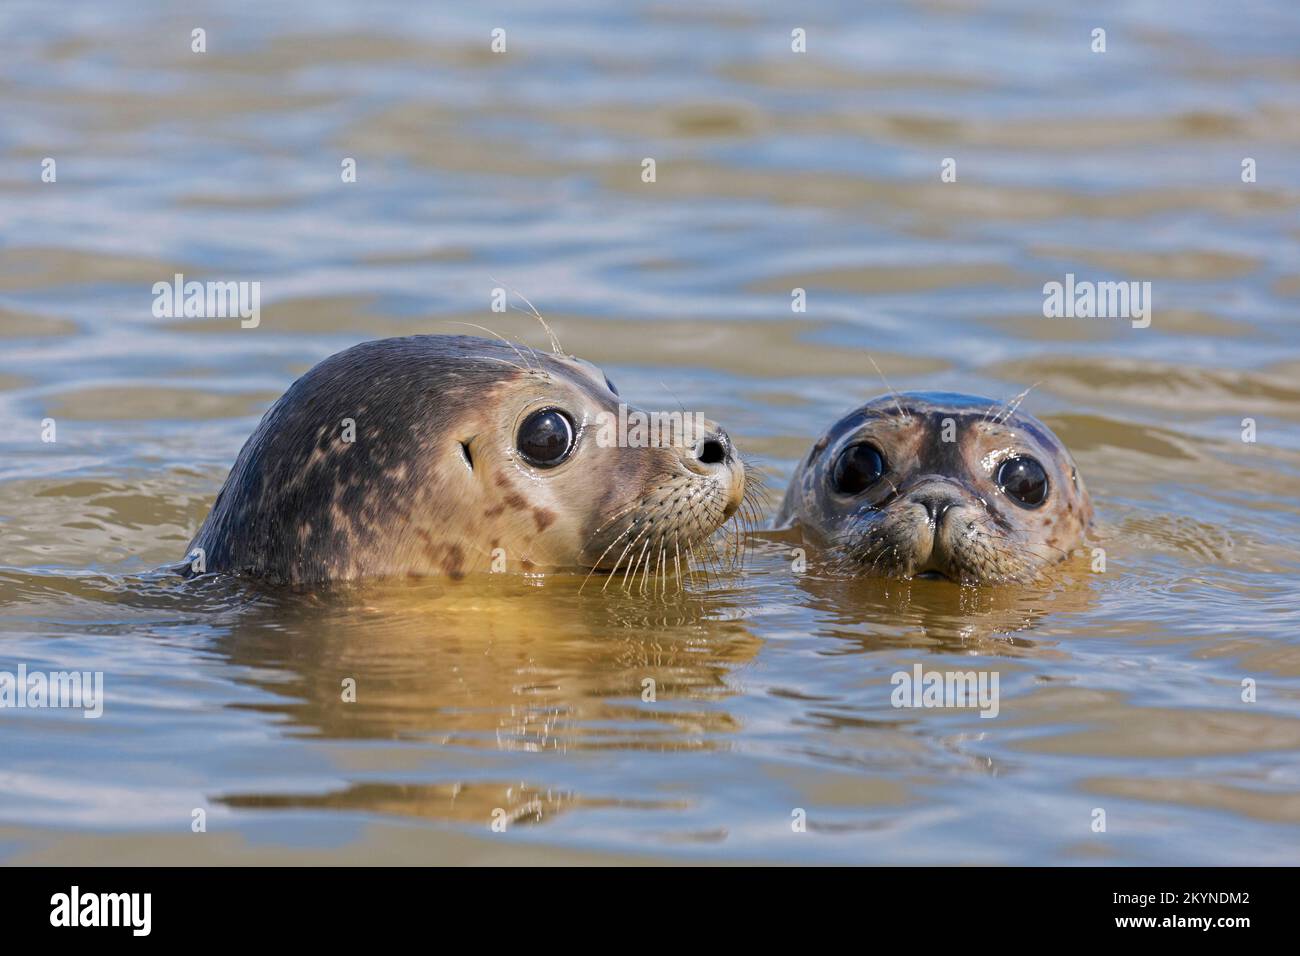 Two young common seals / harbour seals (Phoca vitulina) close-up of juveniles swimming in the North Sea Stock Photo